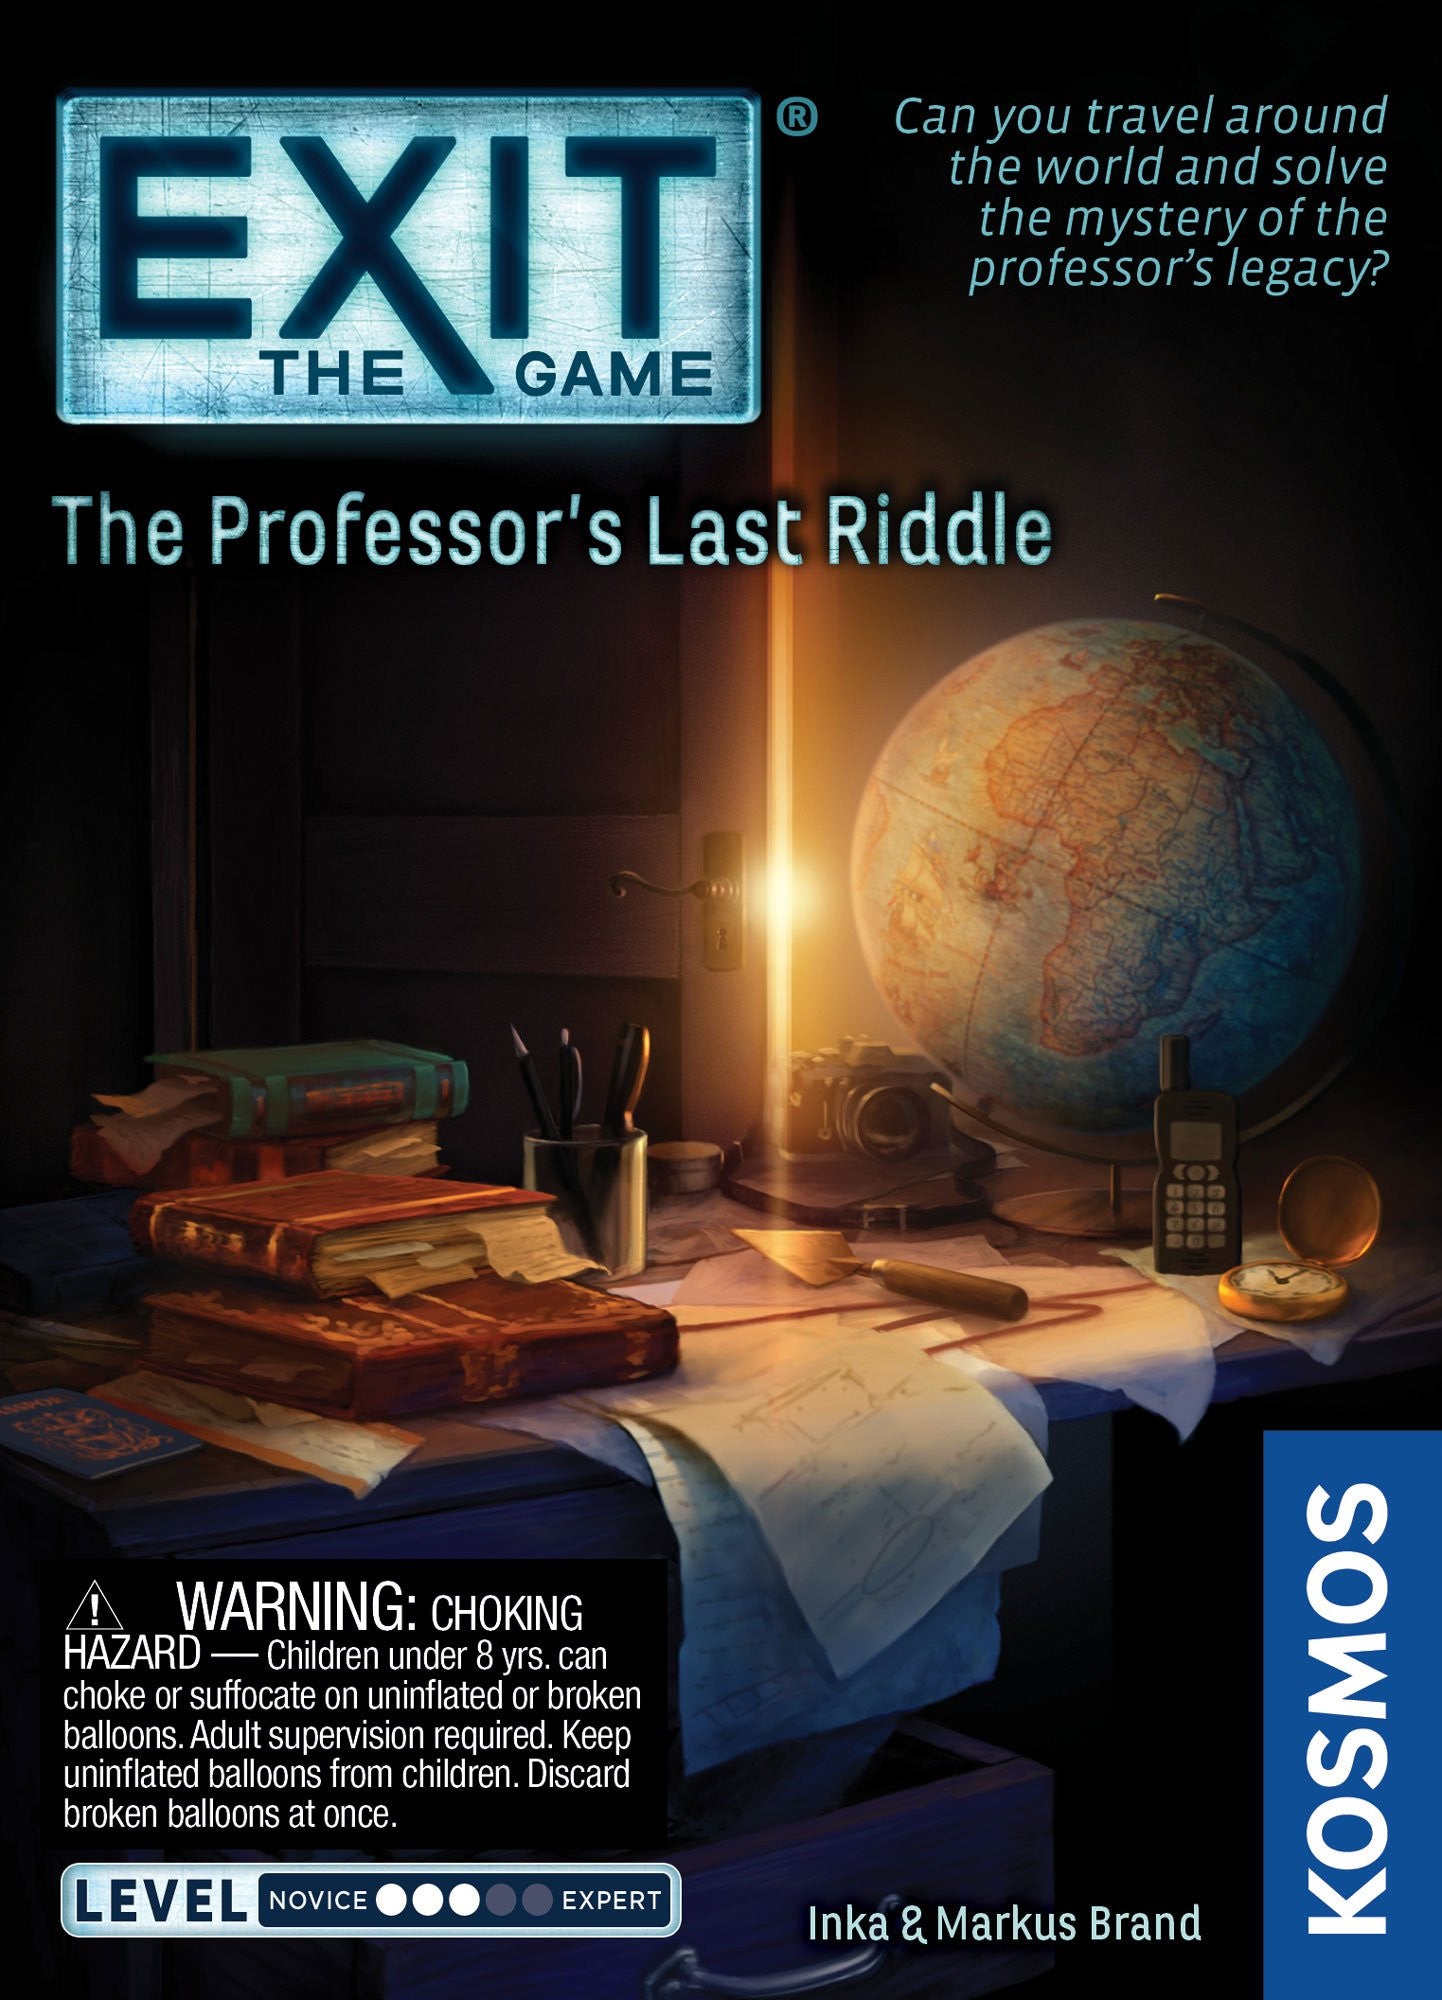 Exit the Game - The Professors Last Riddle